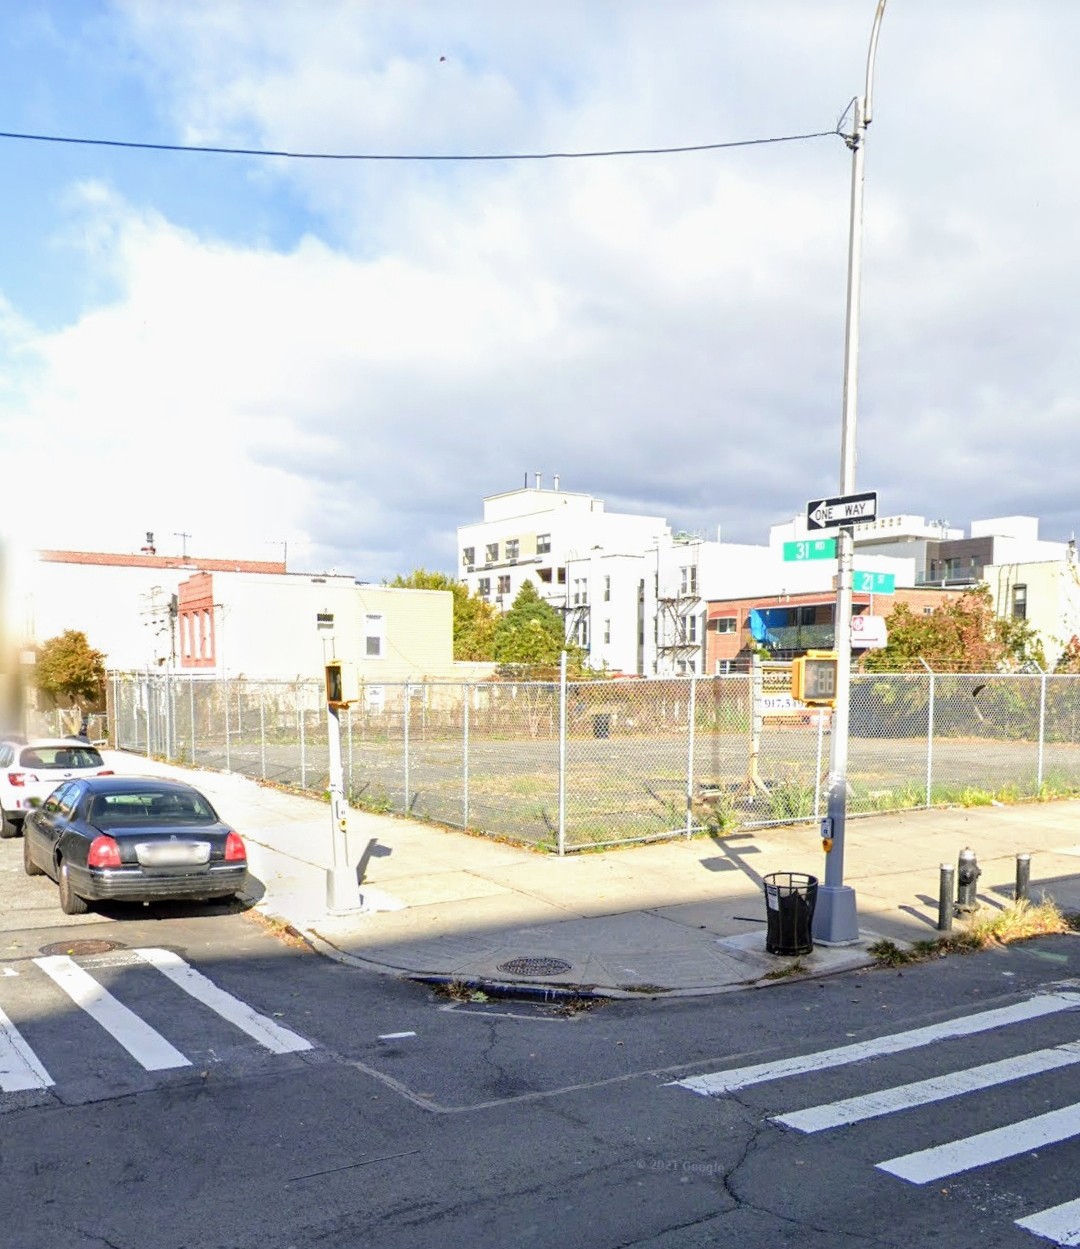 New Mixed-Use Development Planned for 21st Street